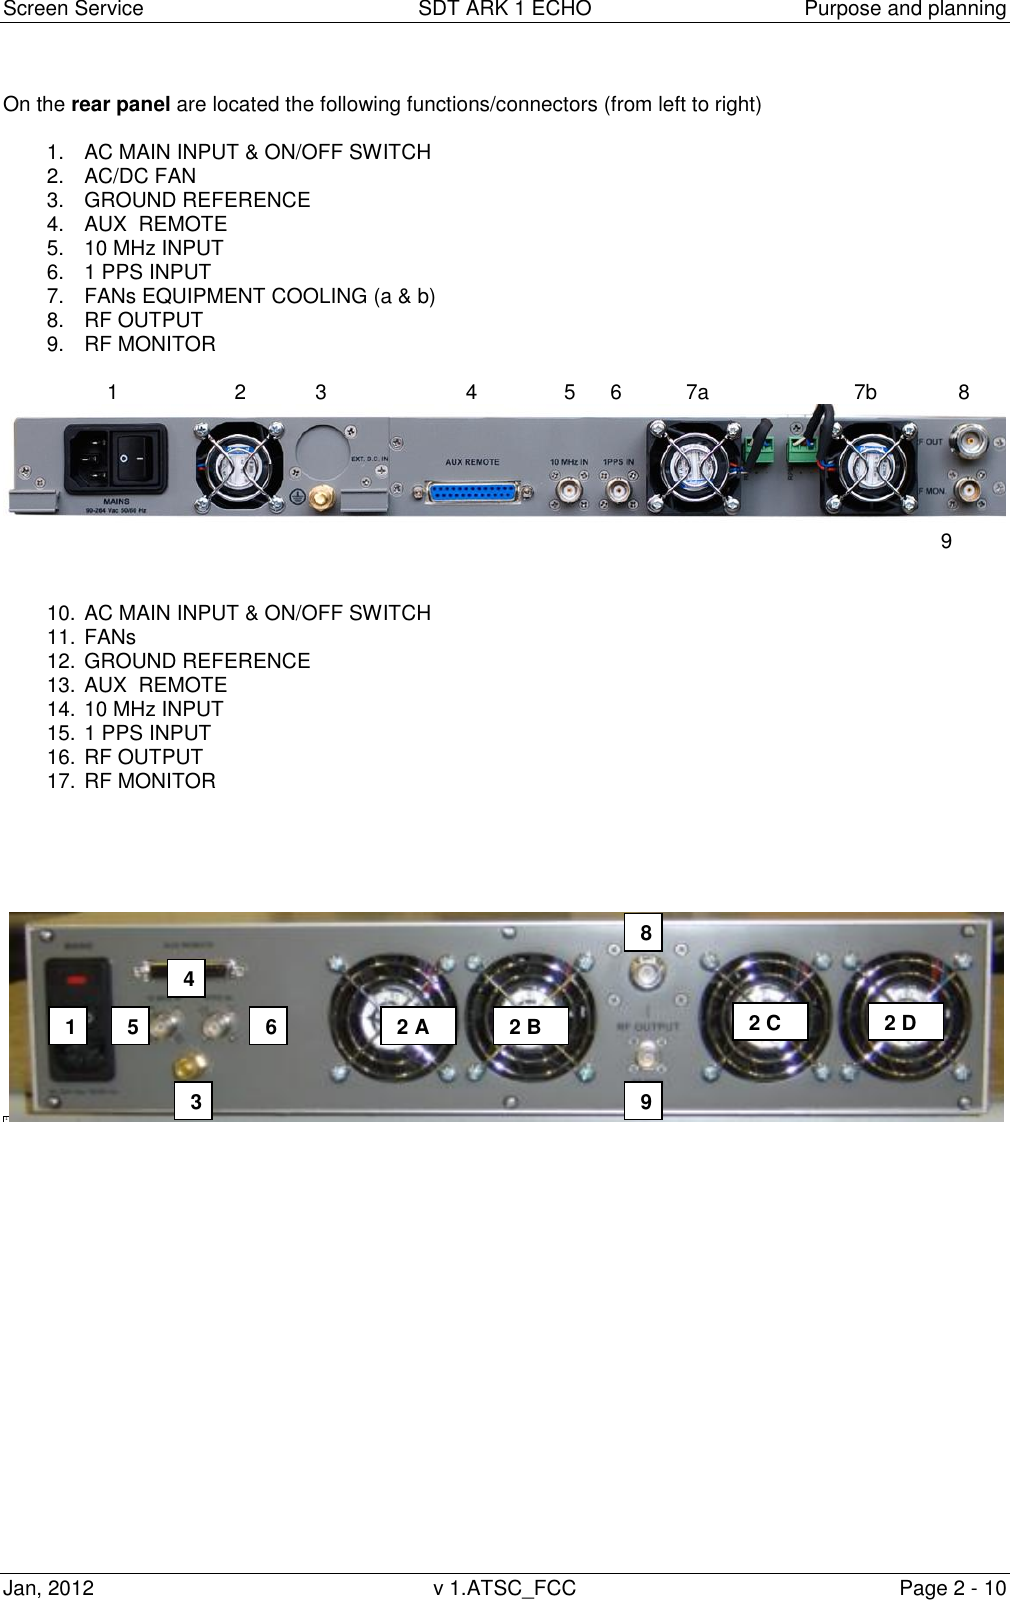 Screen Service  SDT ARK 1 ECHO  Purpose and planning Jan, 2012  v 1.ATSC_FCC  Page 2 - 10  On the rear panel are located the following functions/connectors (from left to right)  1.  AC MAIN INPUT &amp; ON/OFF SWITCH 2.  AC/DC FAN 3.  GROUND REFERENCE 4.  AUX  REMOTE   5.  10 MHz INPUT 6.  1 PPS INPUT 7.  FANs EQUIPMENT COOLING (a &amp; b)  8.  RF OUTPUT  9.  RF MONITOR                     1                    2            3                        4               5      6           7a                         7b              8                                                                                                                                                                    9   10. AC MAIN INPUT &amp; ON/OFF SWITCH 11. FANs  12. GROUND REFERENCE 13. AUX  REMOTE   14. 10 MHz INPUT 15. 1 PPS INPUT 16. RF OUTPUT  17. RF MONITOR                  2 1                    1 2 A 32 1 1 42 1 1 52 1 1 62 1 1 82 1 1 92 1 1 2 B 2 C 2 D 